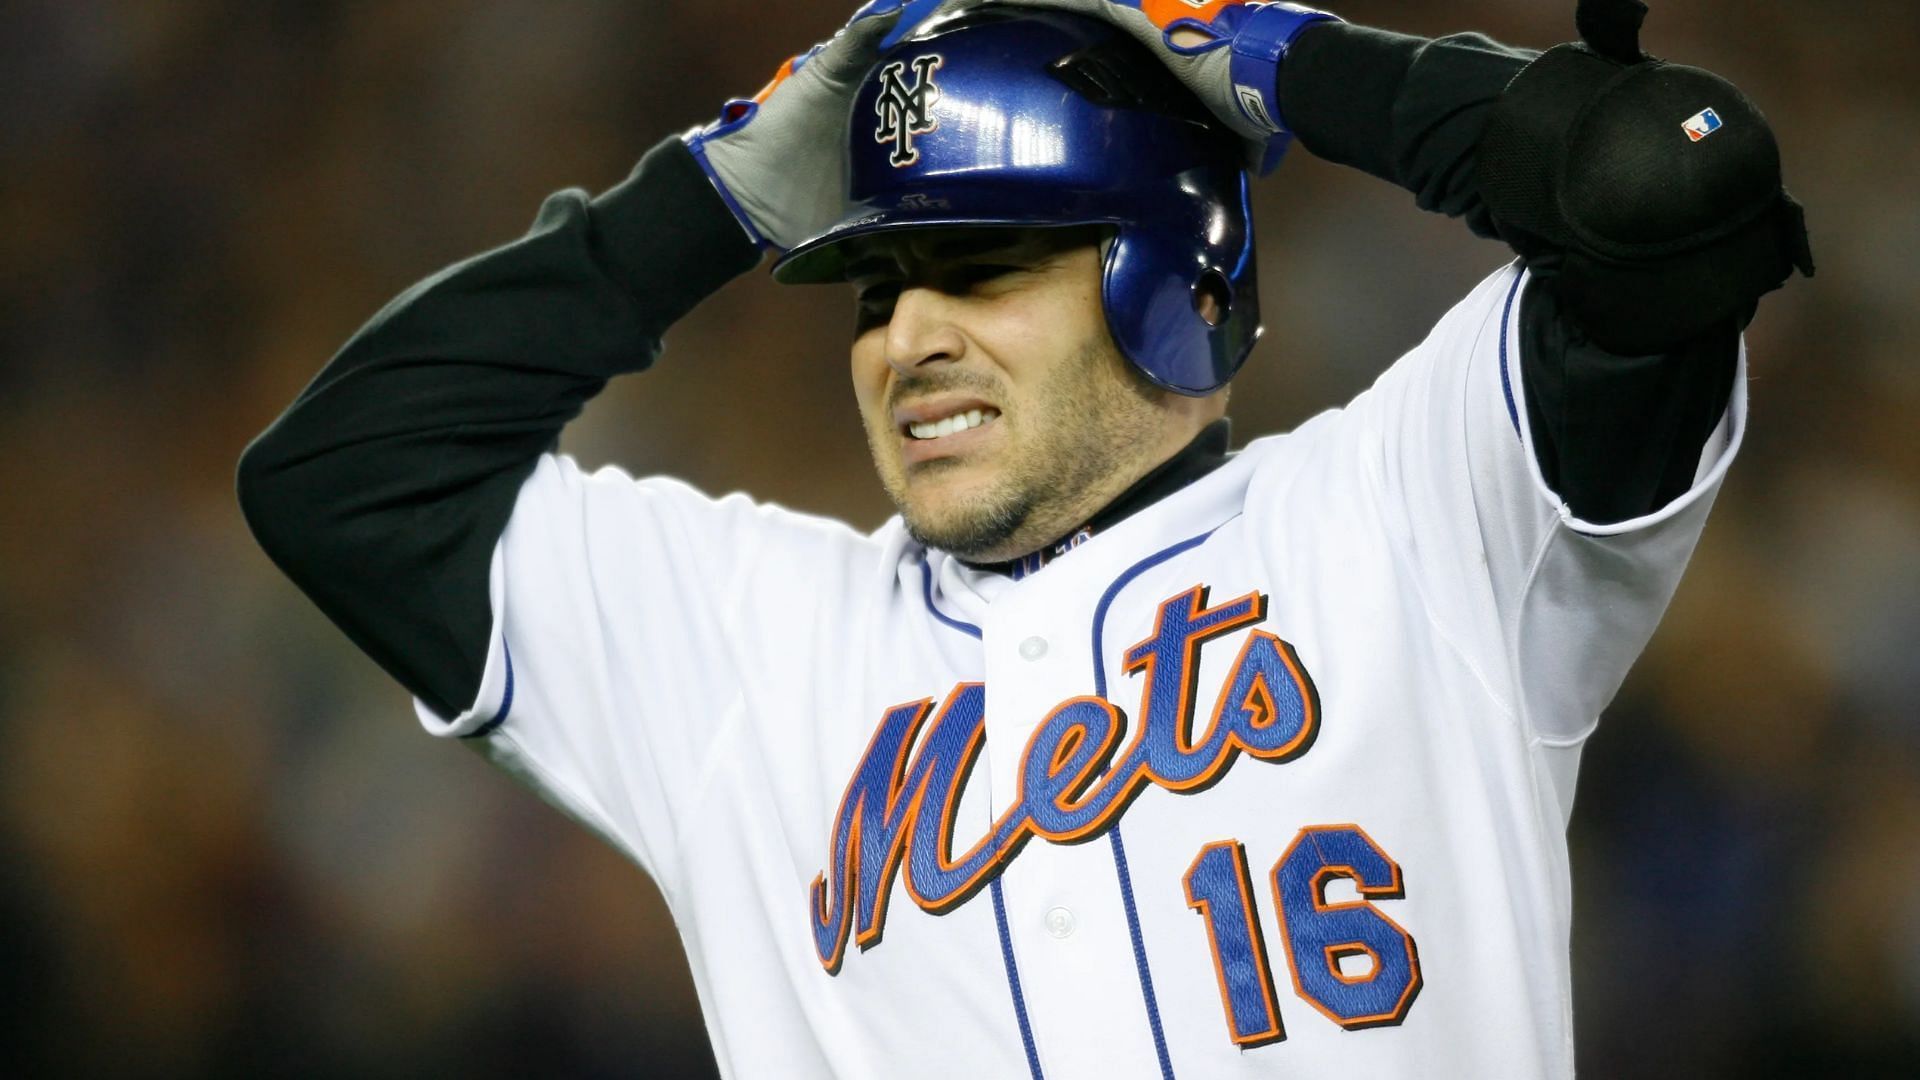 When former New York Mets star Paul Lo Duca lifted the veil on his troubled  divorce following charges of adultery